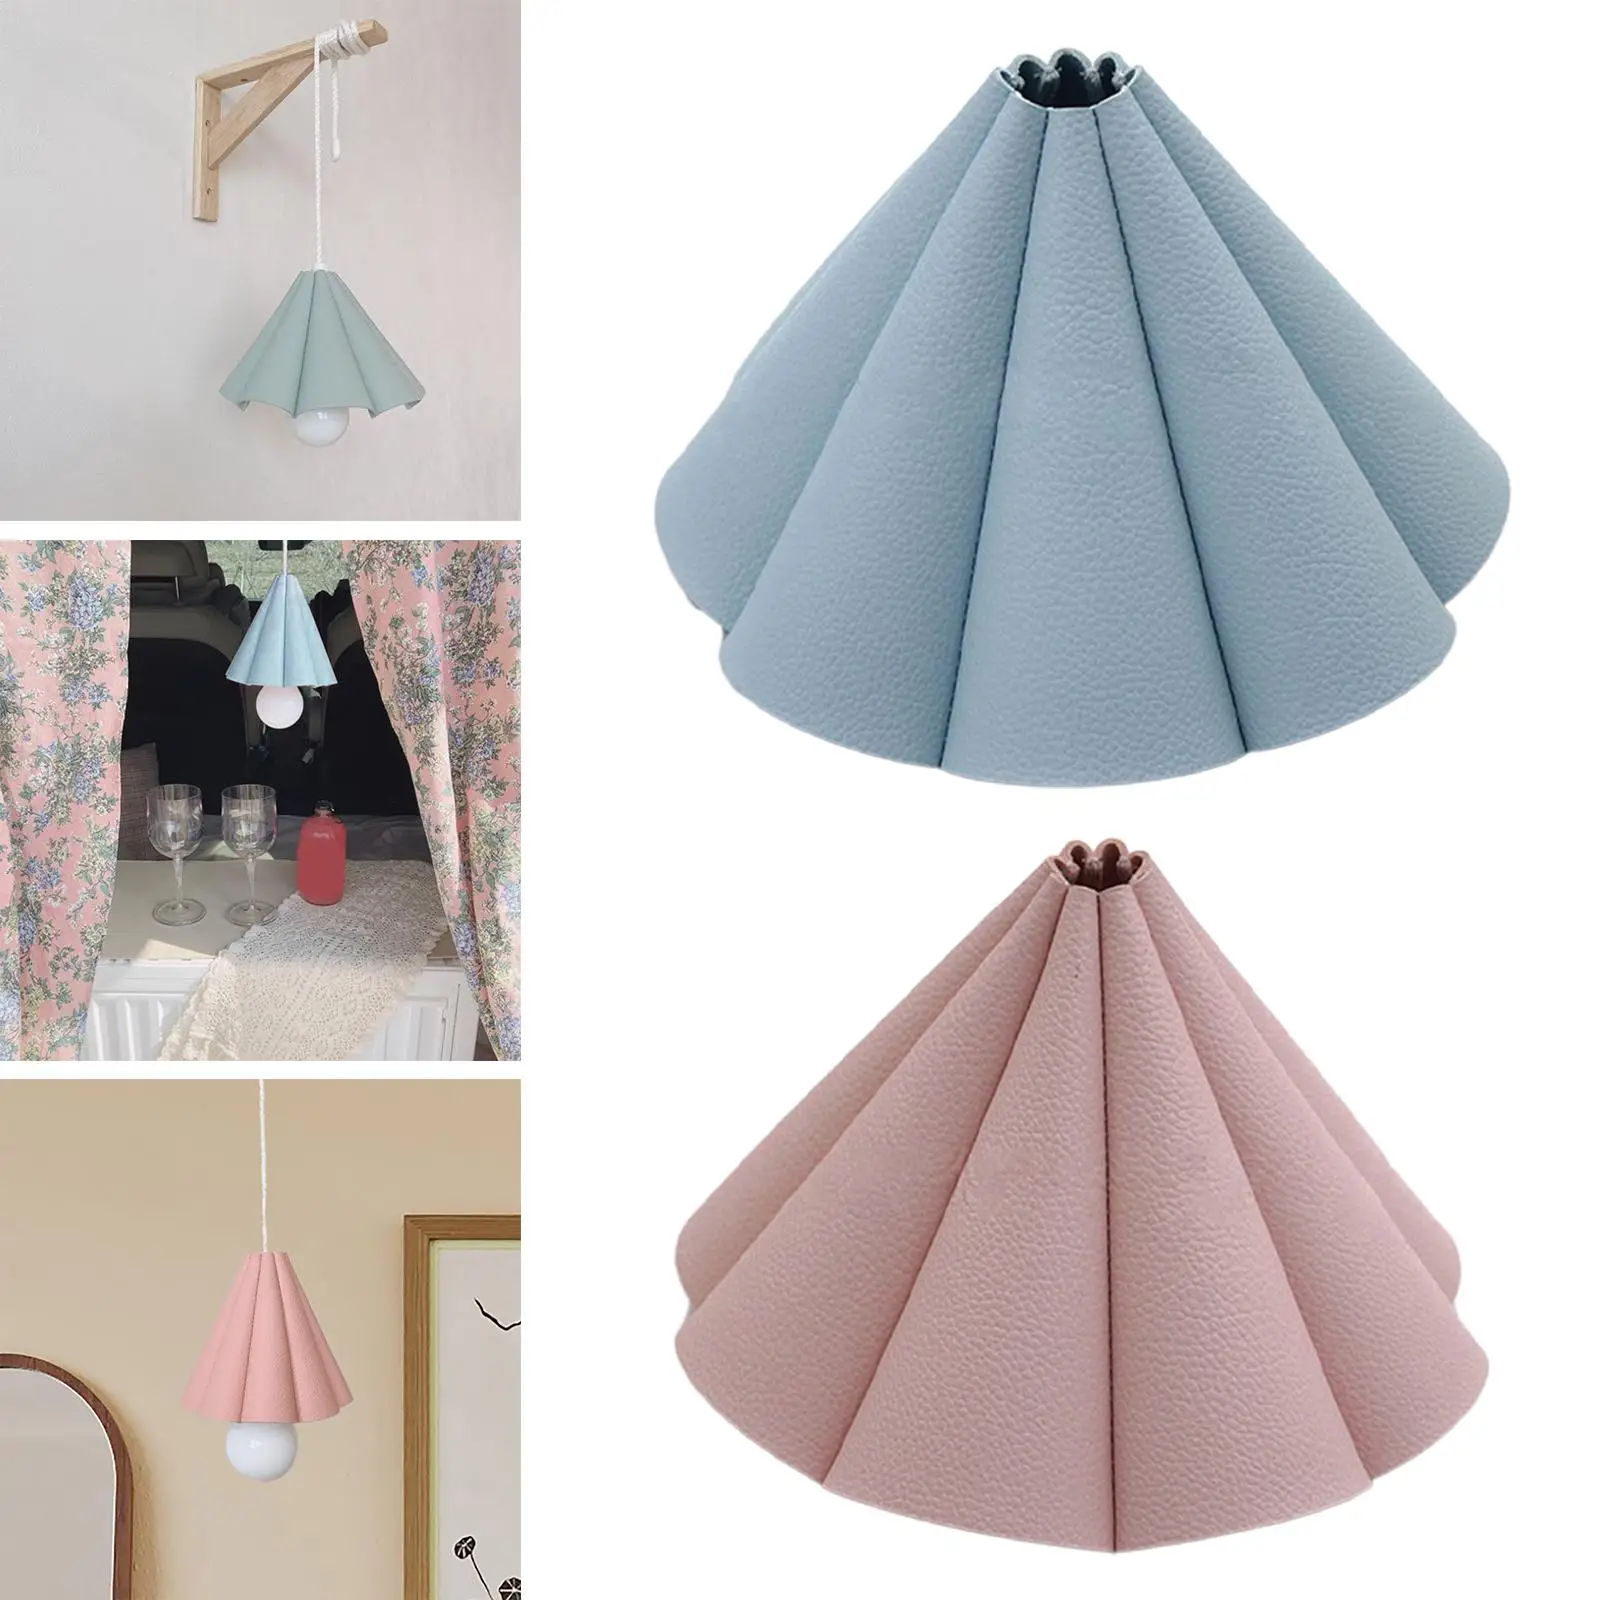 Leather Waterproof Dust Proof Light Cover Removable Lamp Shade for Home